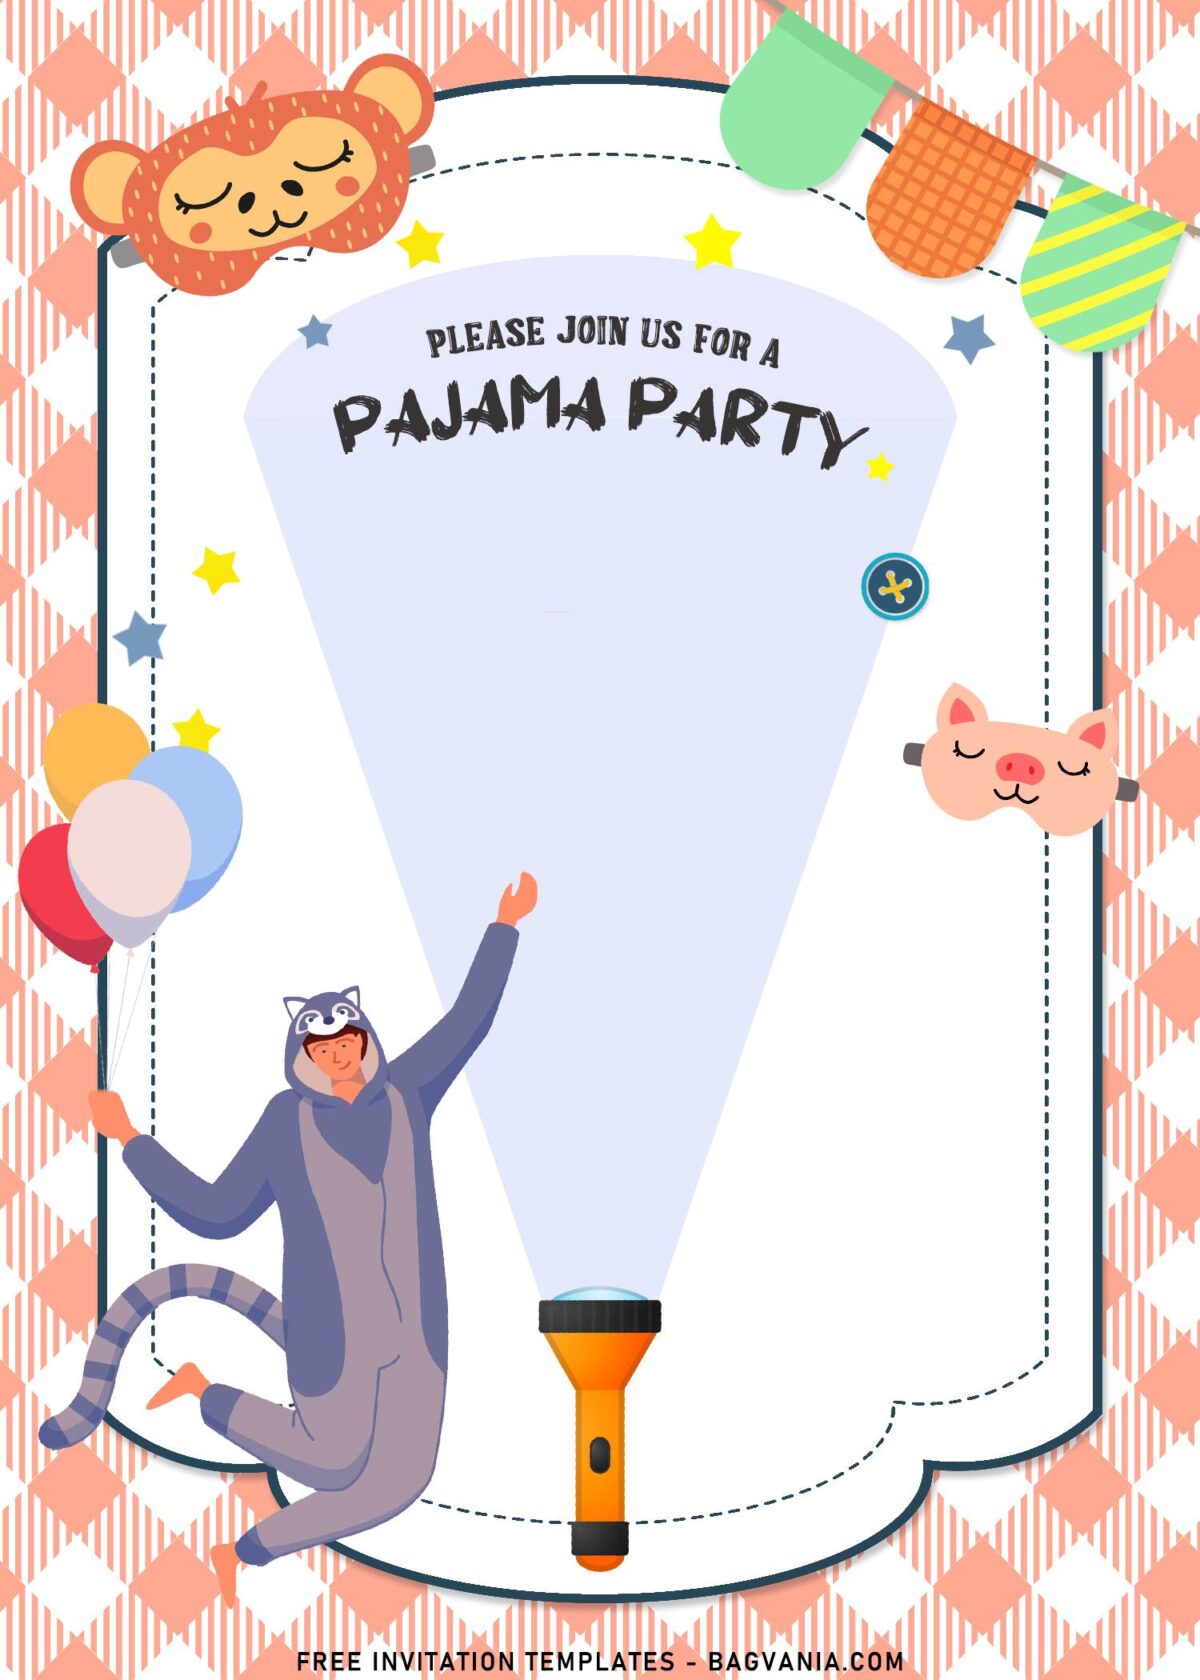 7+ Pajama Party Invitation Templates To Celebrate Your Kid's Birthday with colorful balloons